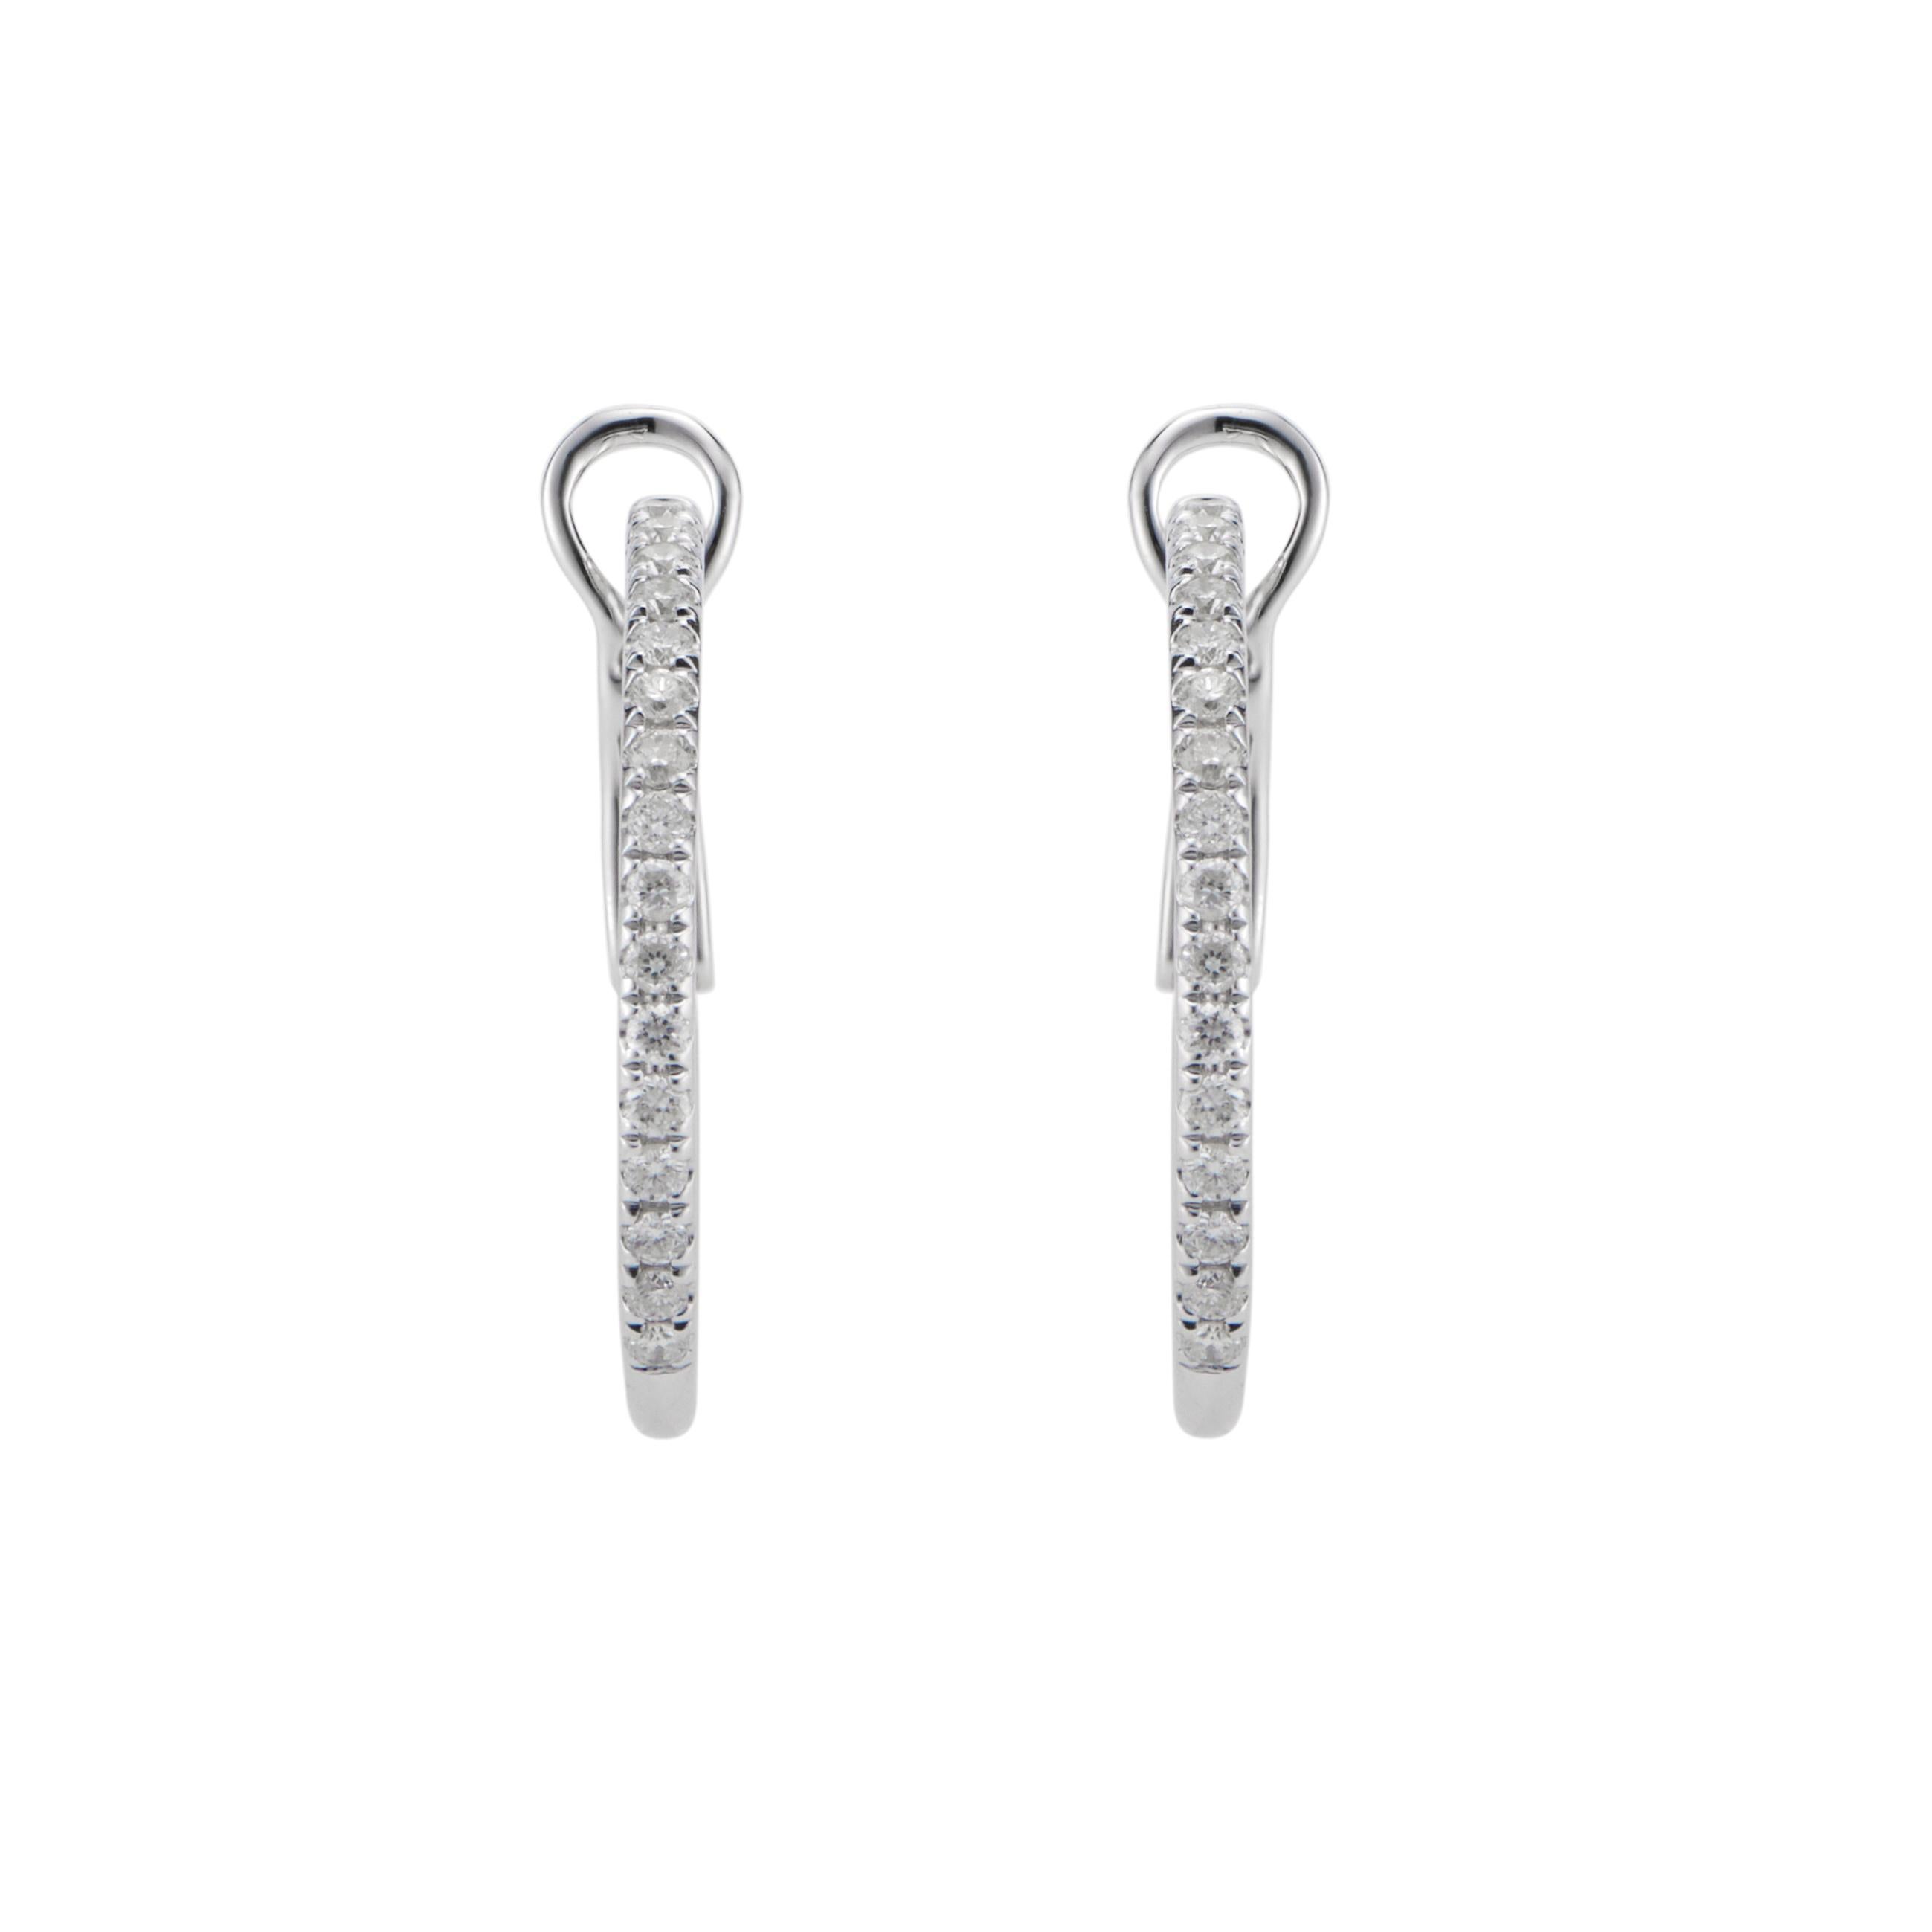 Designer GP clip post hoop earrings with 32 bright white diamonds in 14k white gold. 

32 round full cut diamonds, approx. total weight .30cts, G, VS2
14k white gold 
Stamped: 14k 585
Tested: 14k
Hallmark: GP
2.6 grams
Top to bottom: 19.10mm or .75